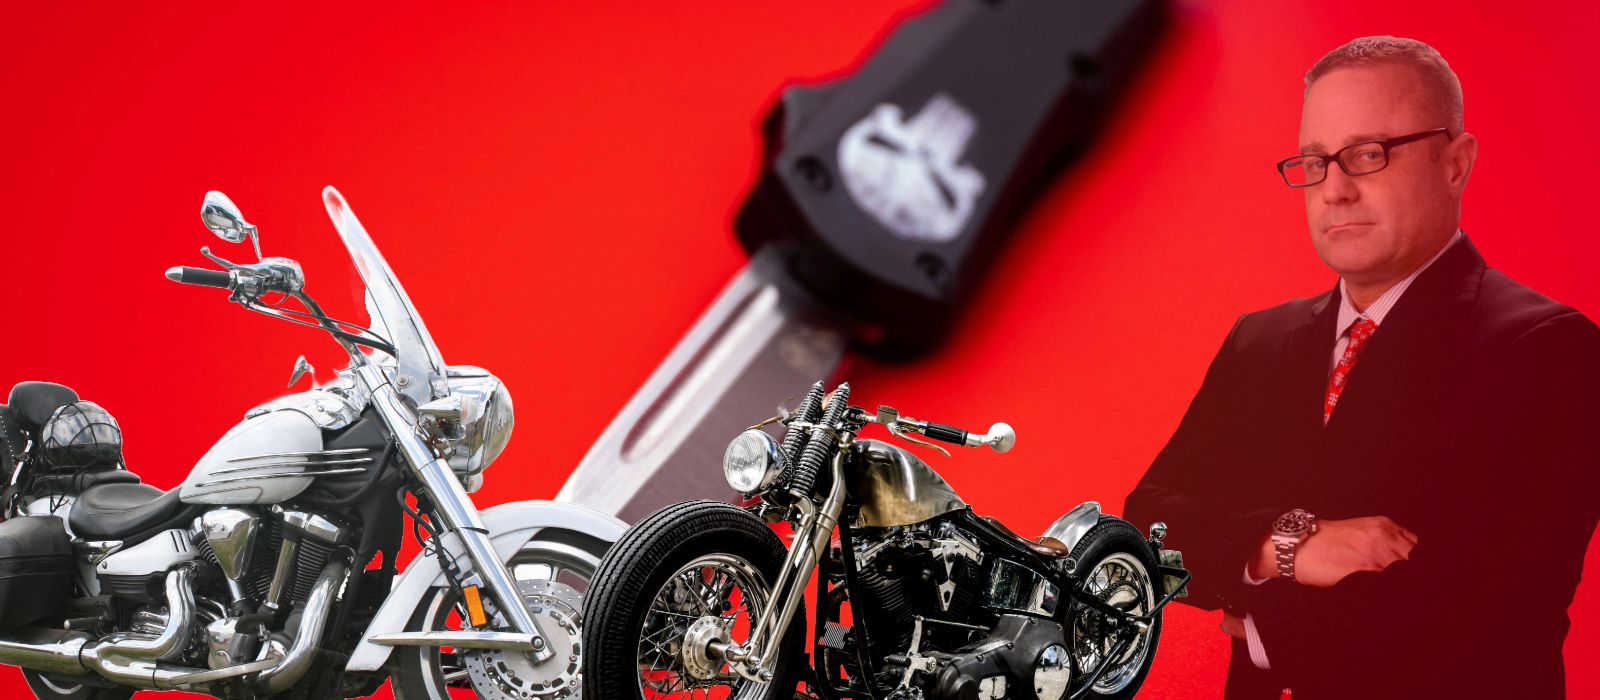 Sheathed Knife Open-Carry Laws in California for Bikers Navigating Municipal Codes